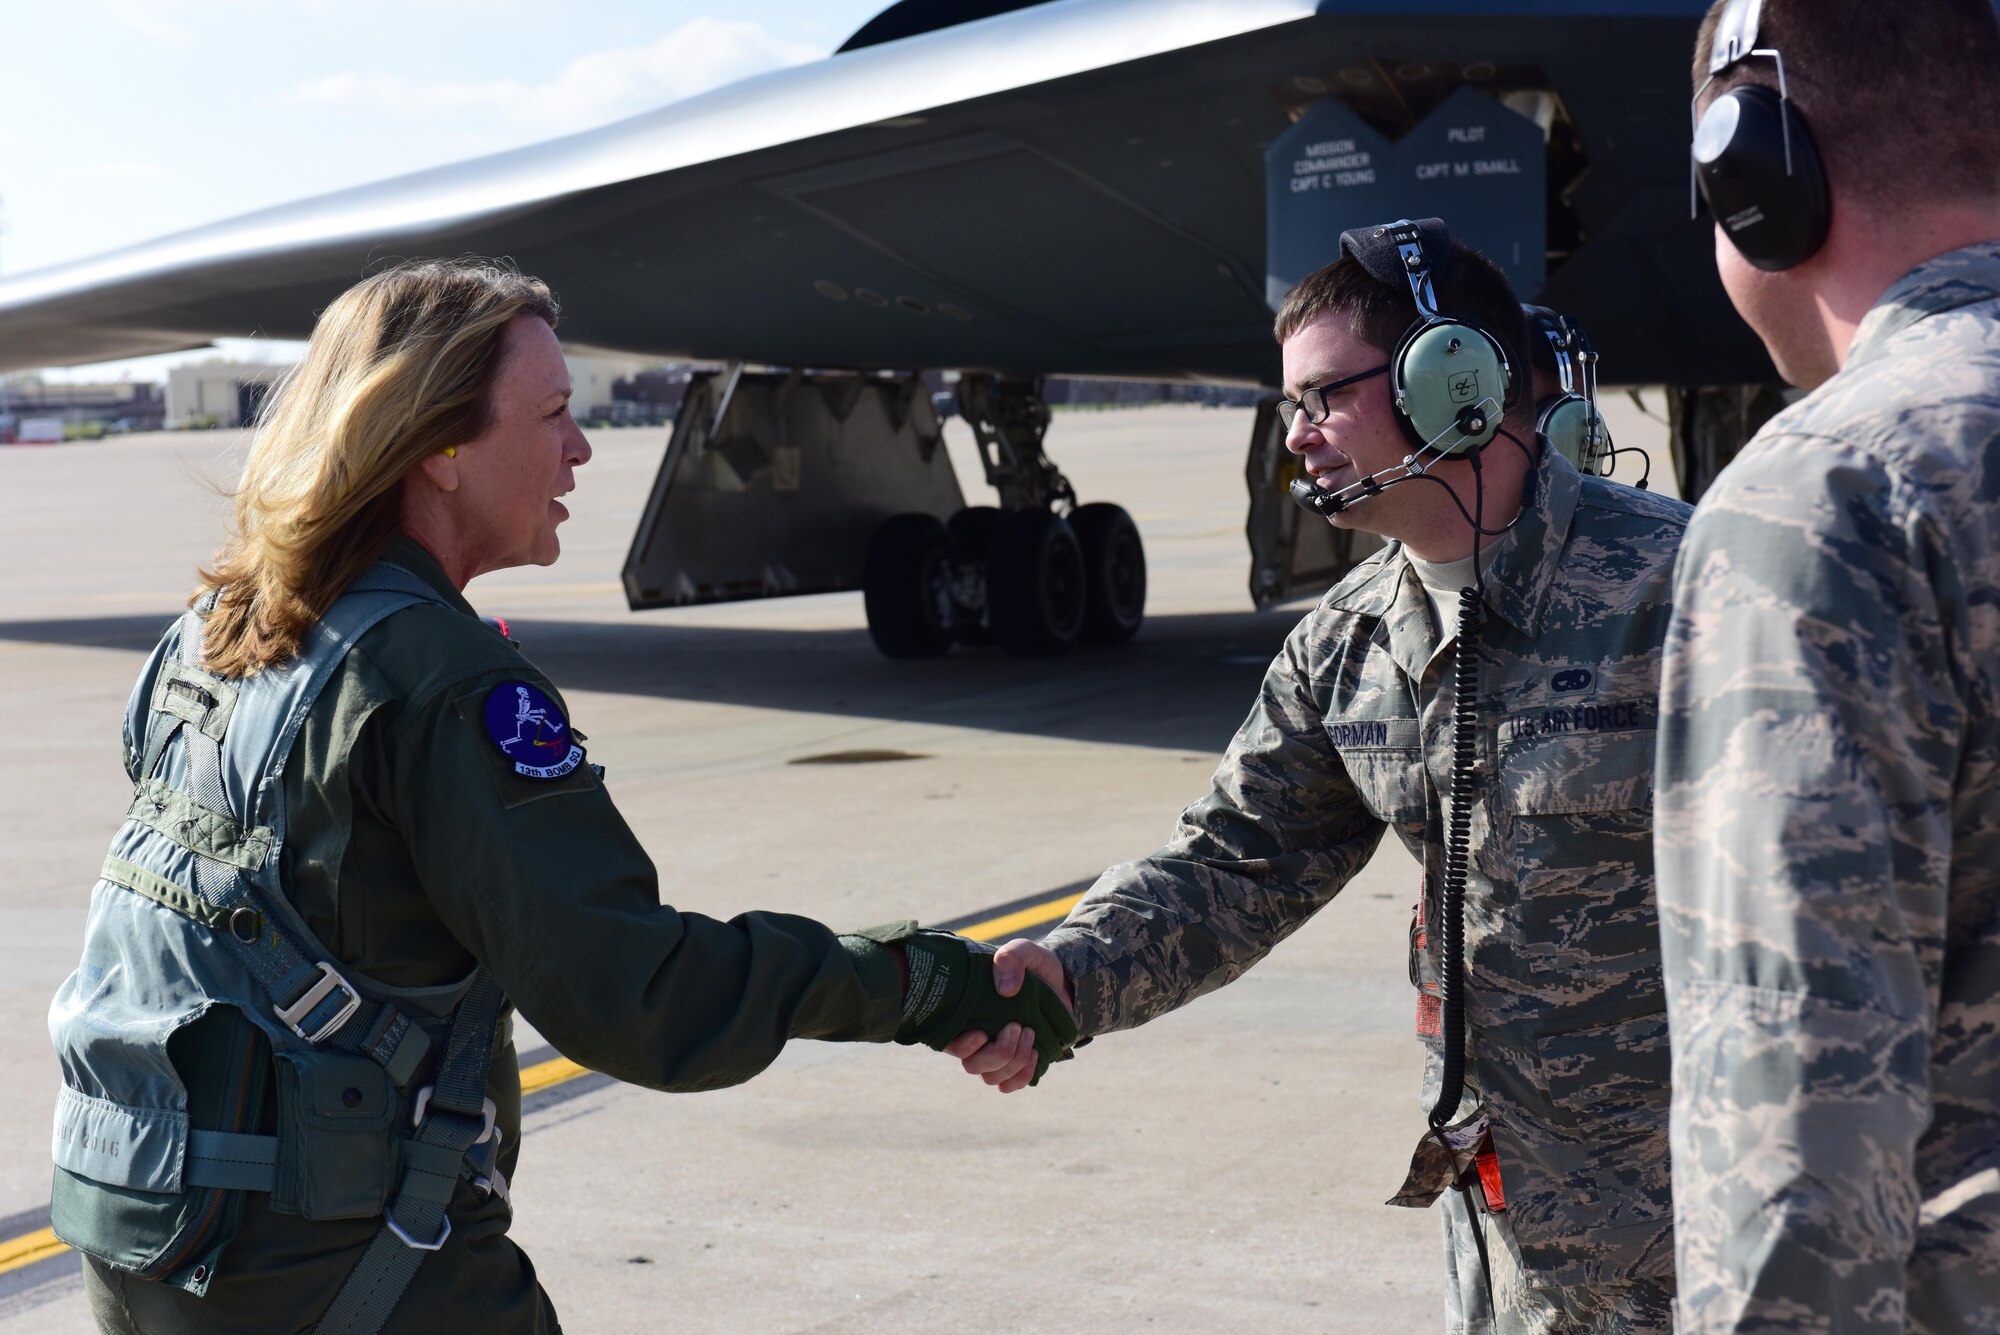 Secretary of the Air Force Deborah Lee James, left, shakes hands with U.S. Air Force Staff Sgt. Tyler Gorman, a crew chief from the 509th Aircraft Maintenance Squadron, before flying in a B-2 Spirit at Whiteman Air Force Base, Mo., Nov. 8, 2016. During James’ visit to Whiteman, she learned more about the wing’s role in strategic deterrence, held an all call, and flew in a B-2 Spirit. (U.S. Air Force photo by Senior Airman Joel Pfiester)